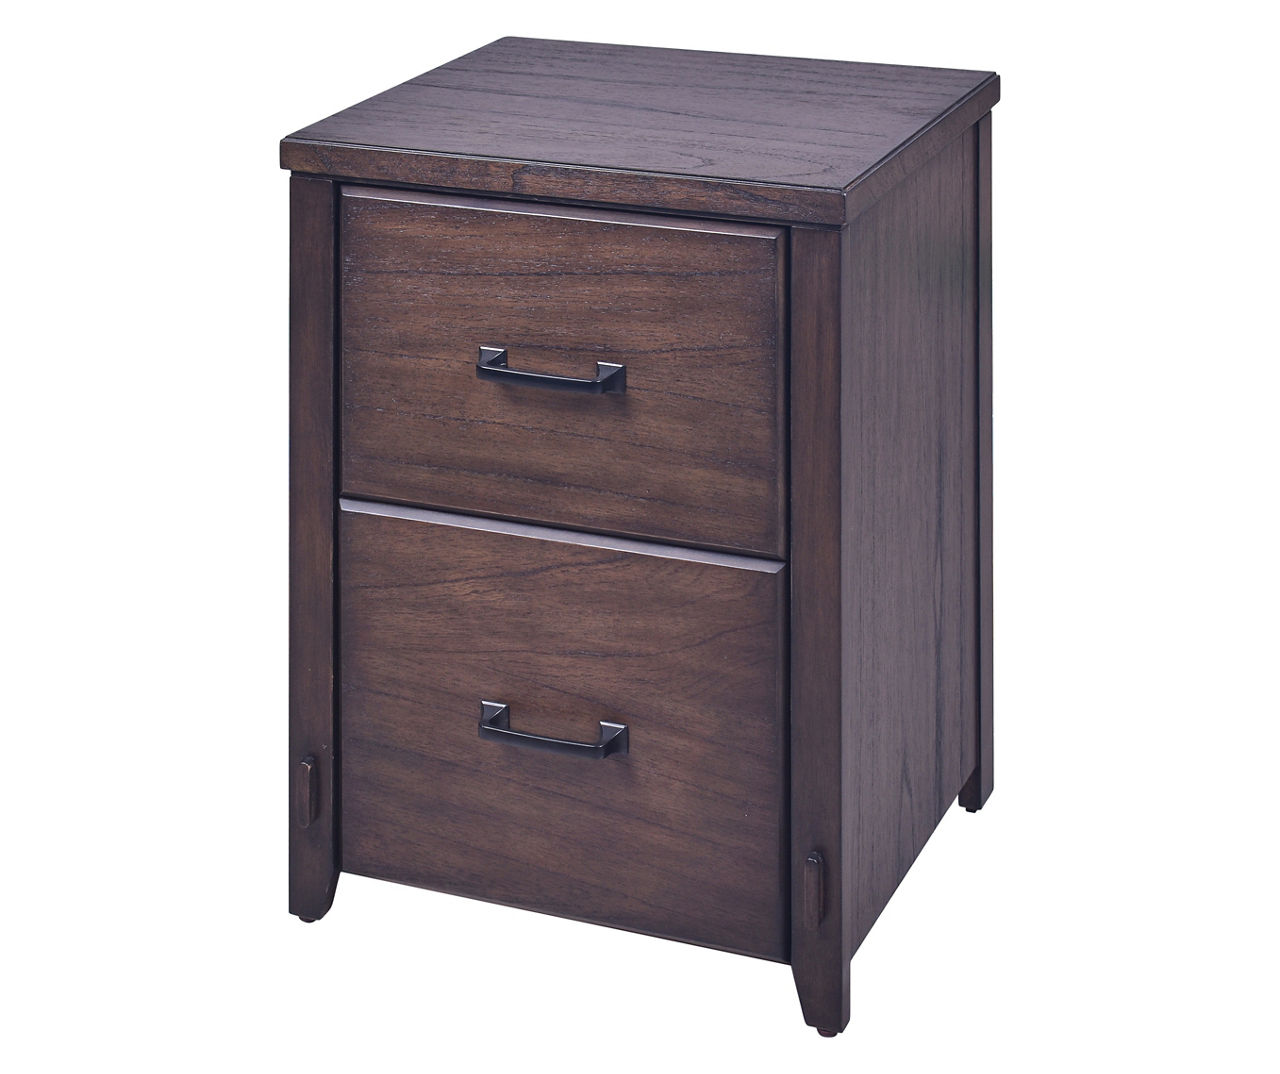 Broyhill Heirlooms 2-Drawer Filing Cabinet